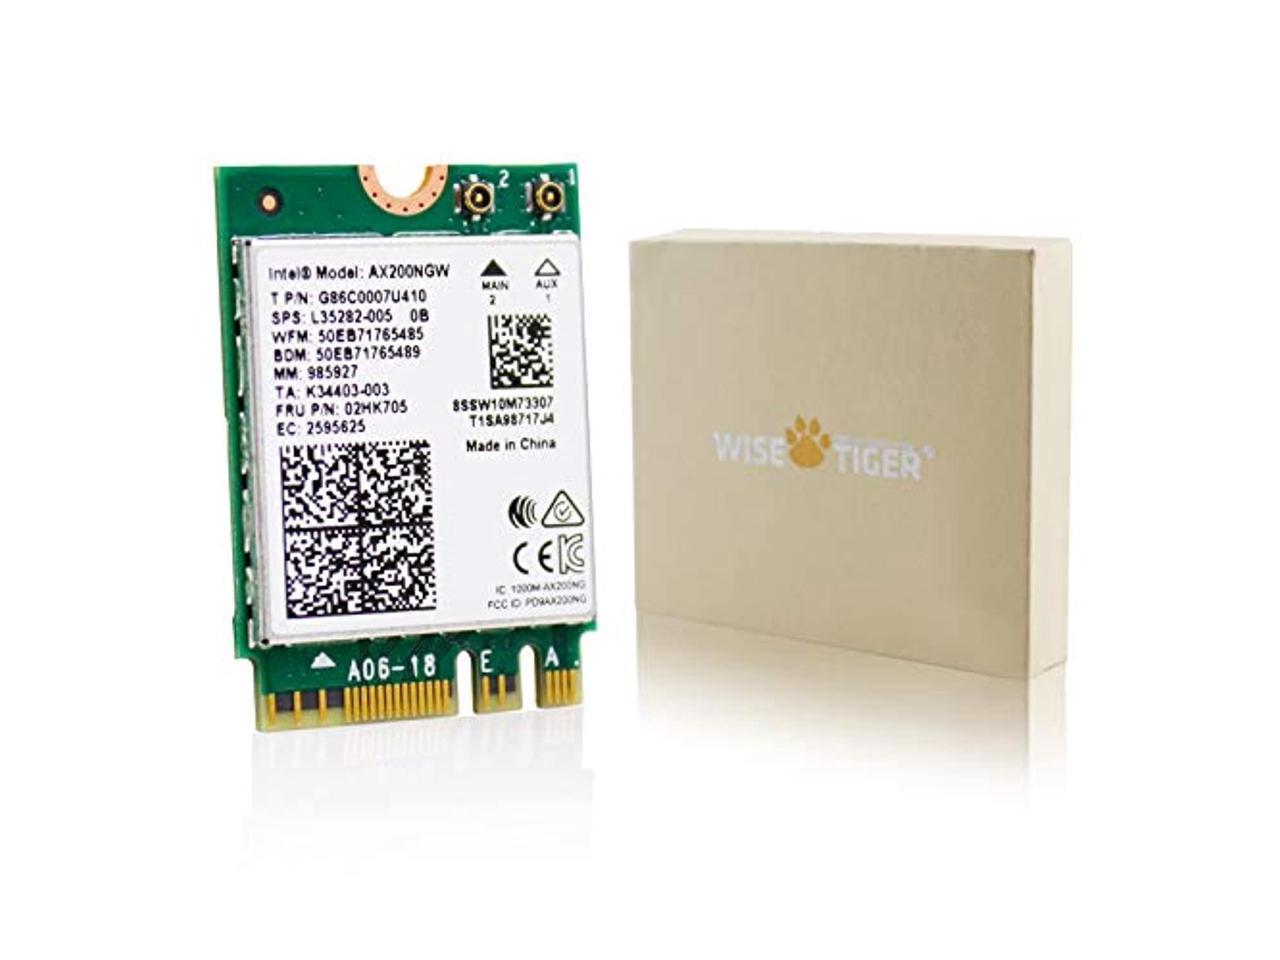 WISE TIGER WiFi 6 Card AX 3000Mbps PCIe Network Card AX200 2.4Ghz//5.8Ghz with Bluetooth 5.1 /& Heat Sink Wireless PCI Express Wi-Fi Adapters Dual Band Antenna for Windows 10 64-bit